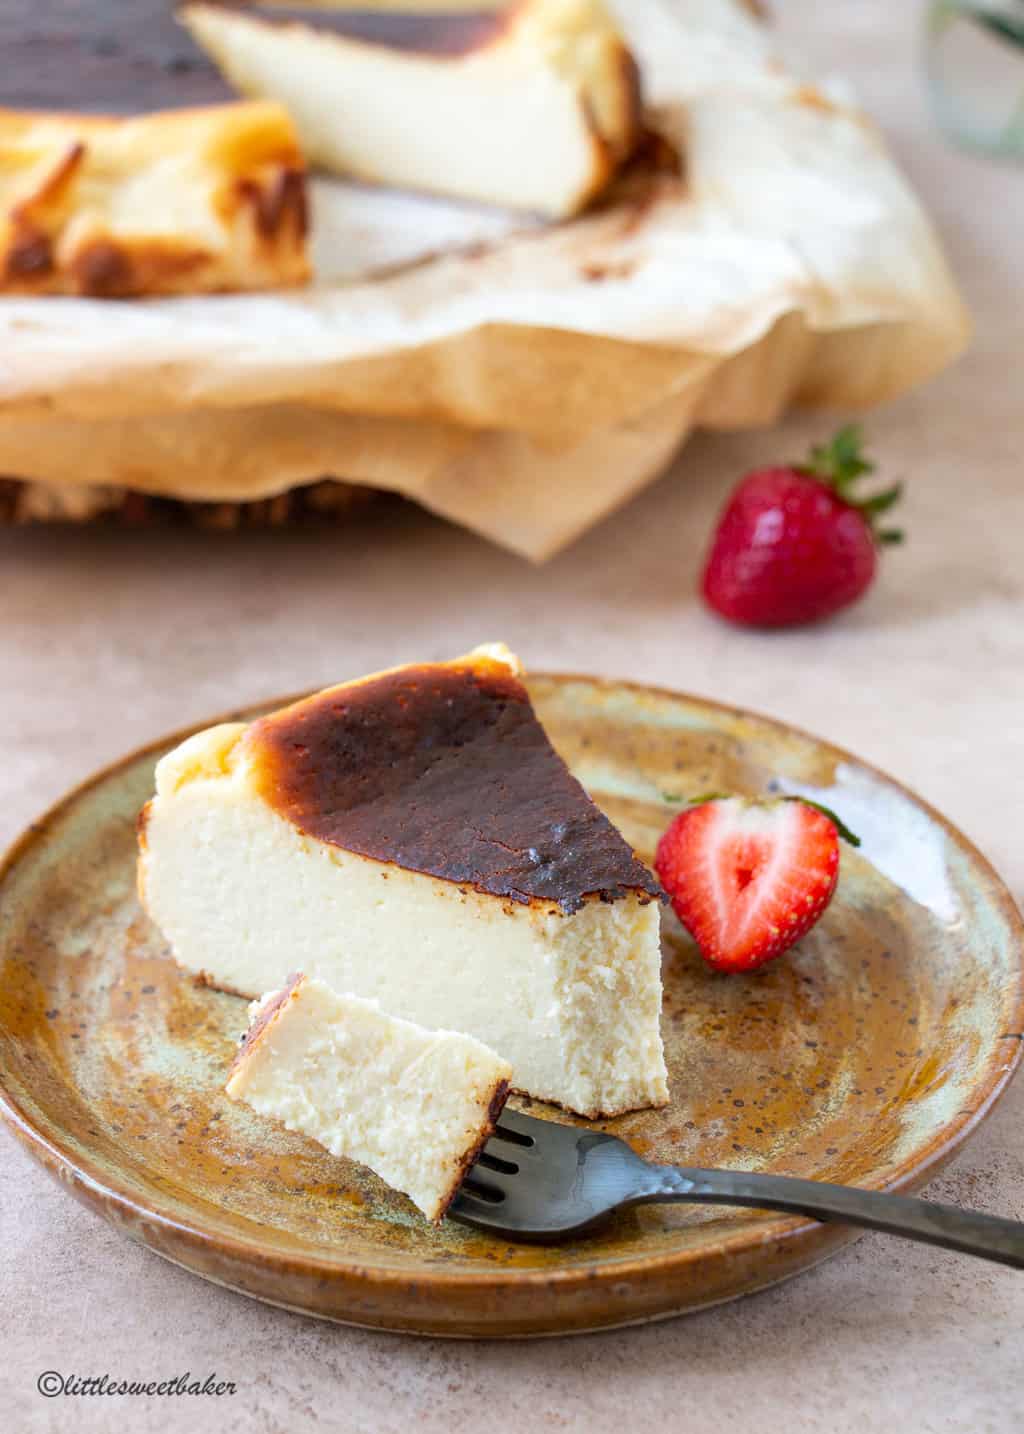 A slice of basque cheesecake on a plate with a piece on a fork.